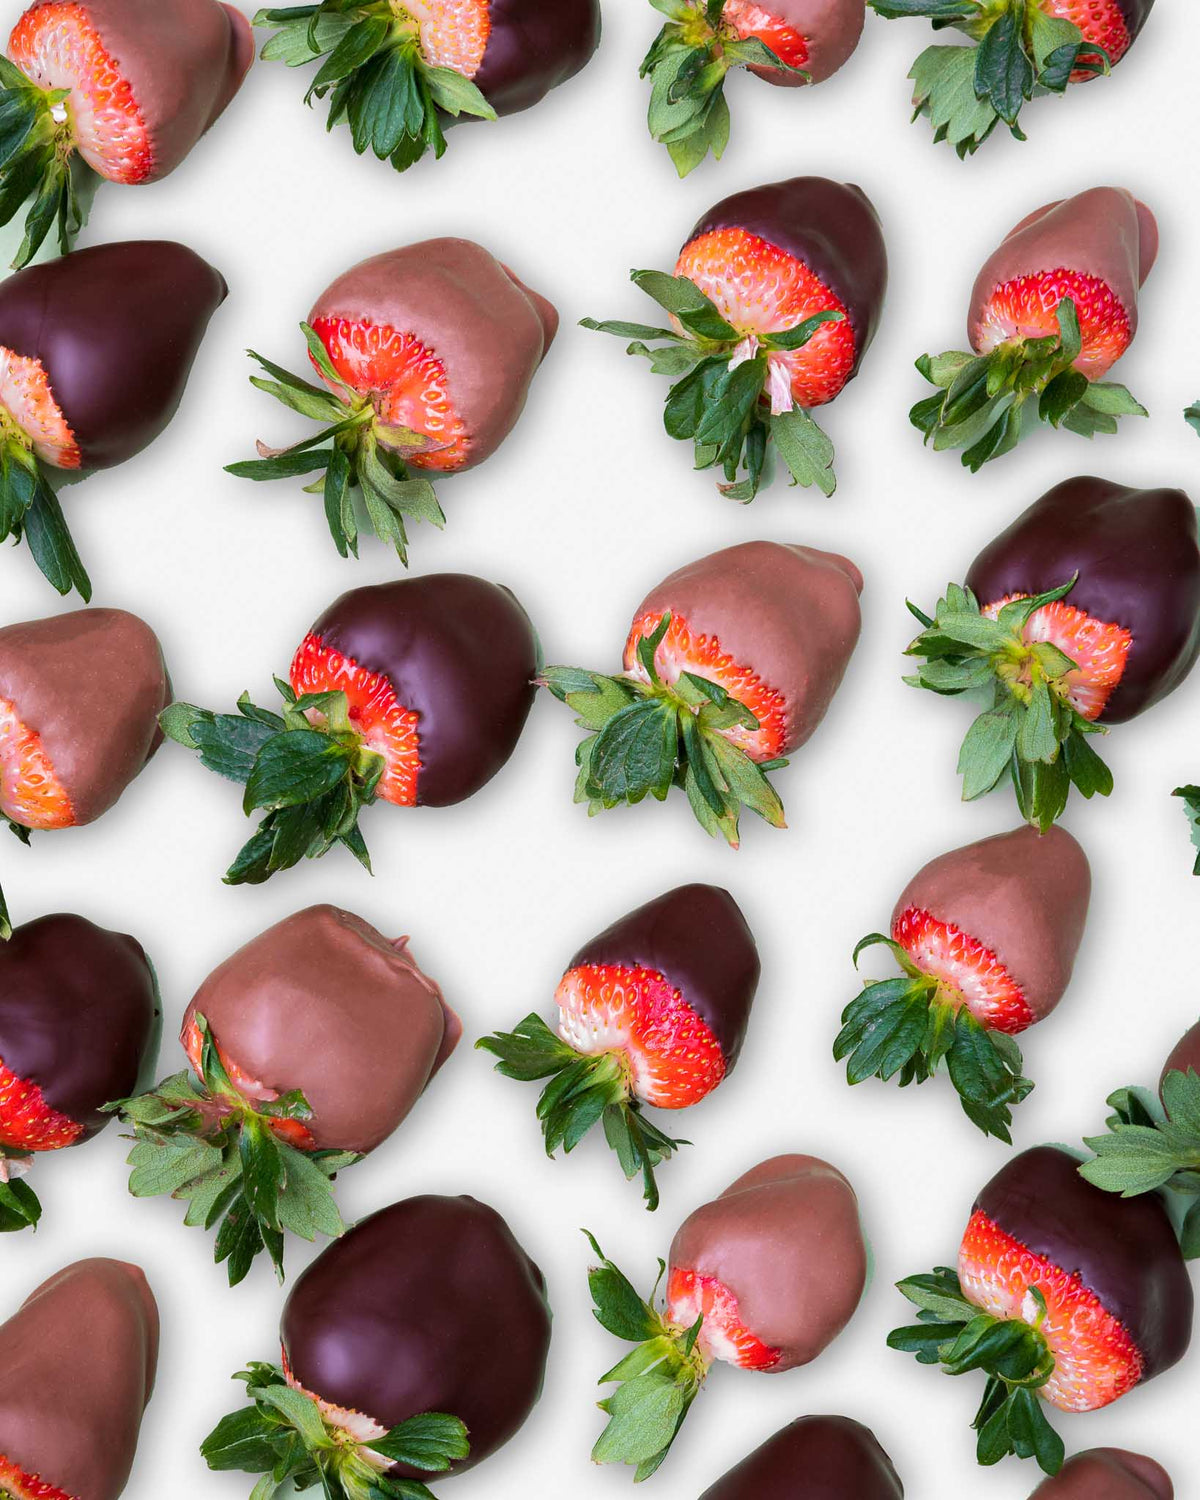 Chocolate Covered Strawberries Delivery - Shipping Nationwide